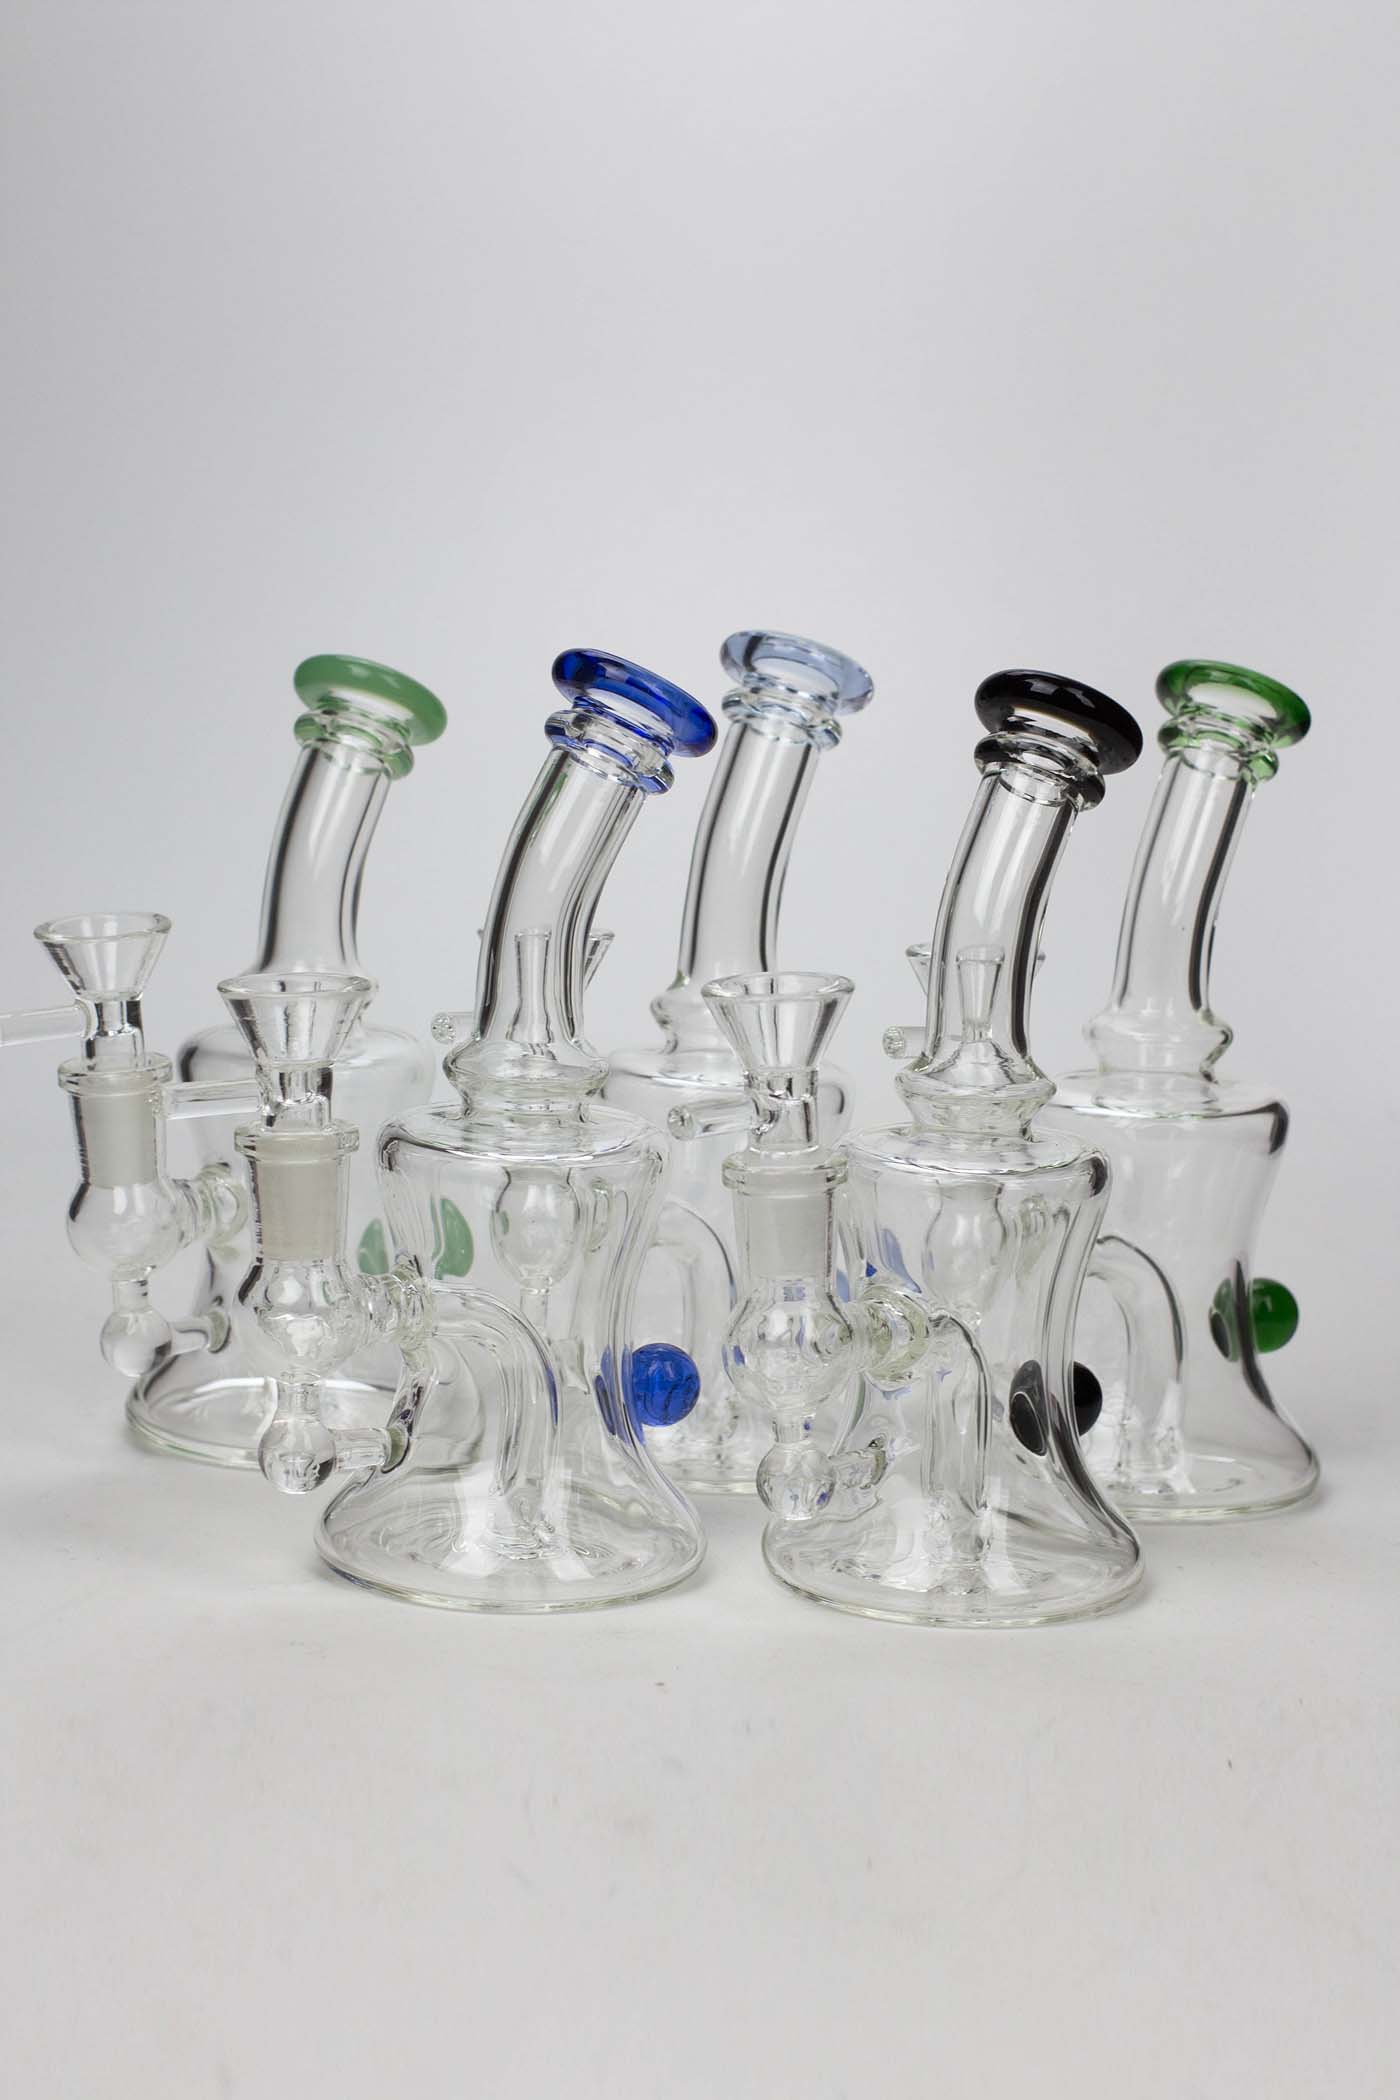 Fixed 3 hole diffuser skirt bubbler_8